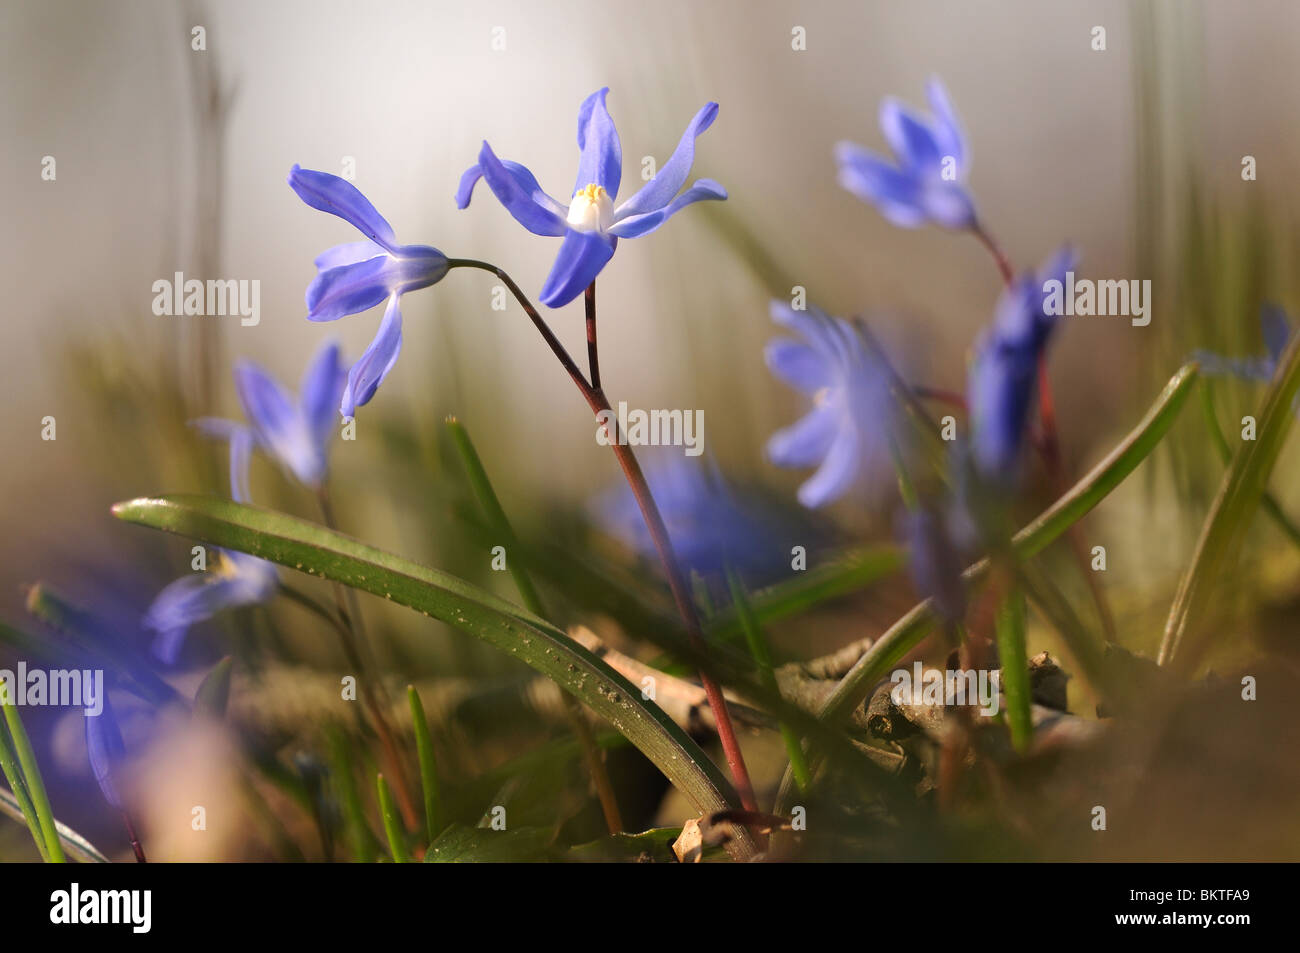 Stalk and blue flowers of Glory in the snow on the ground between grass and other flowers Stock Photo